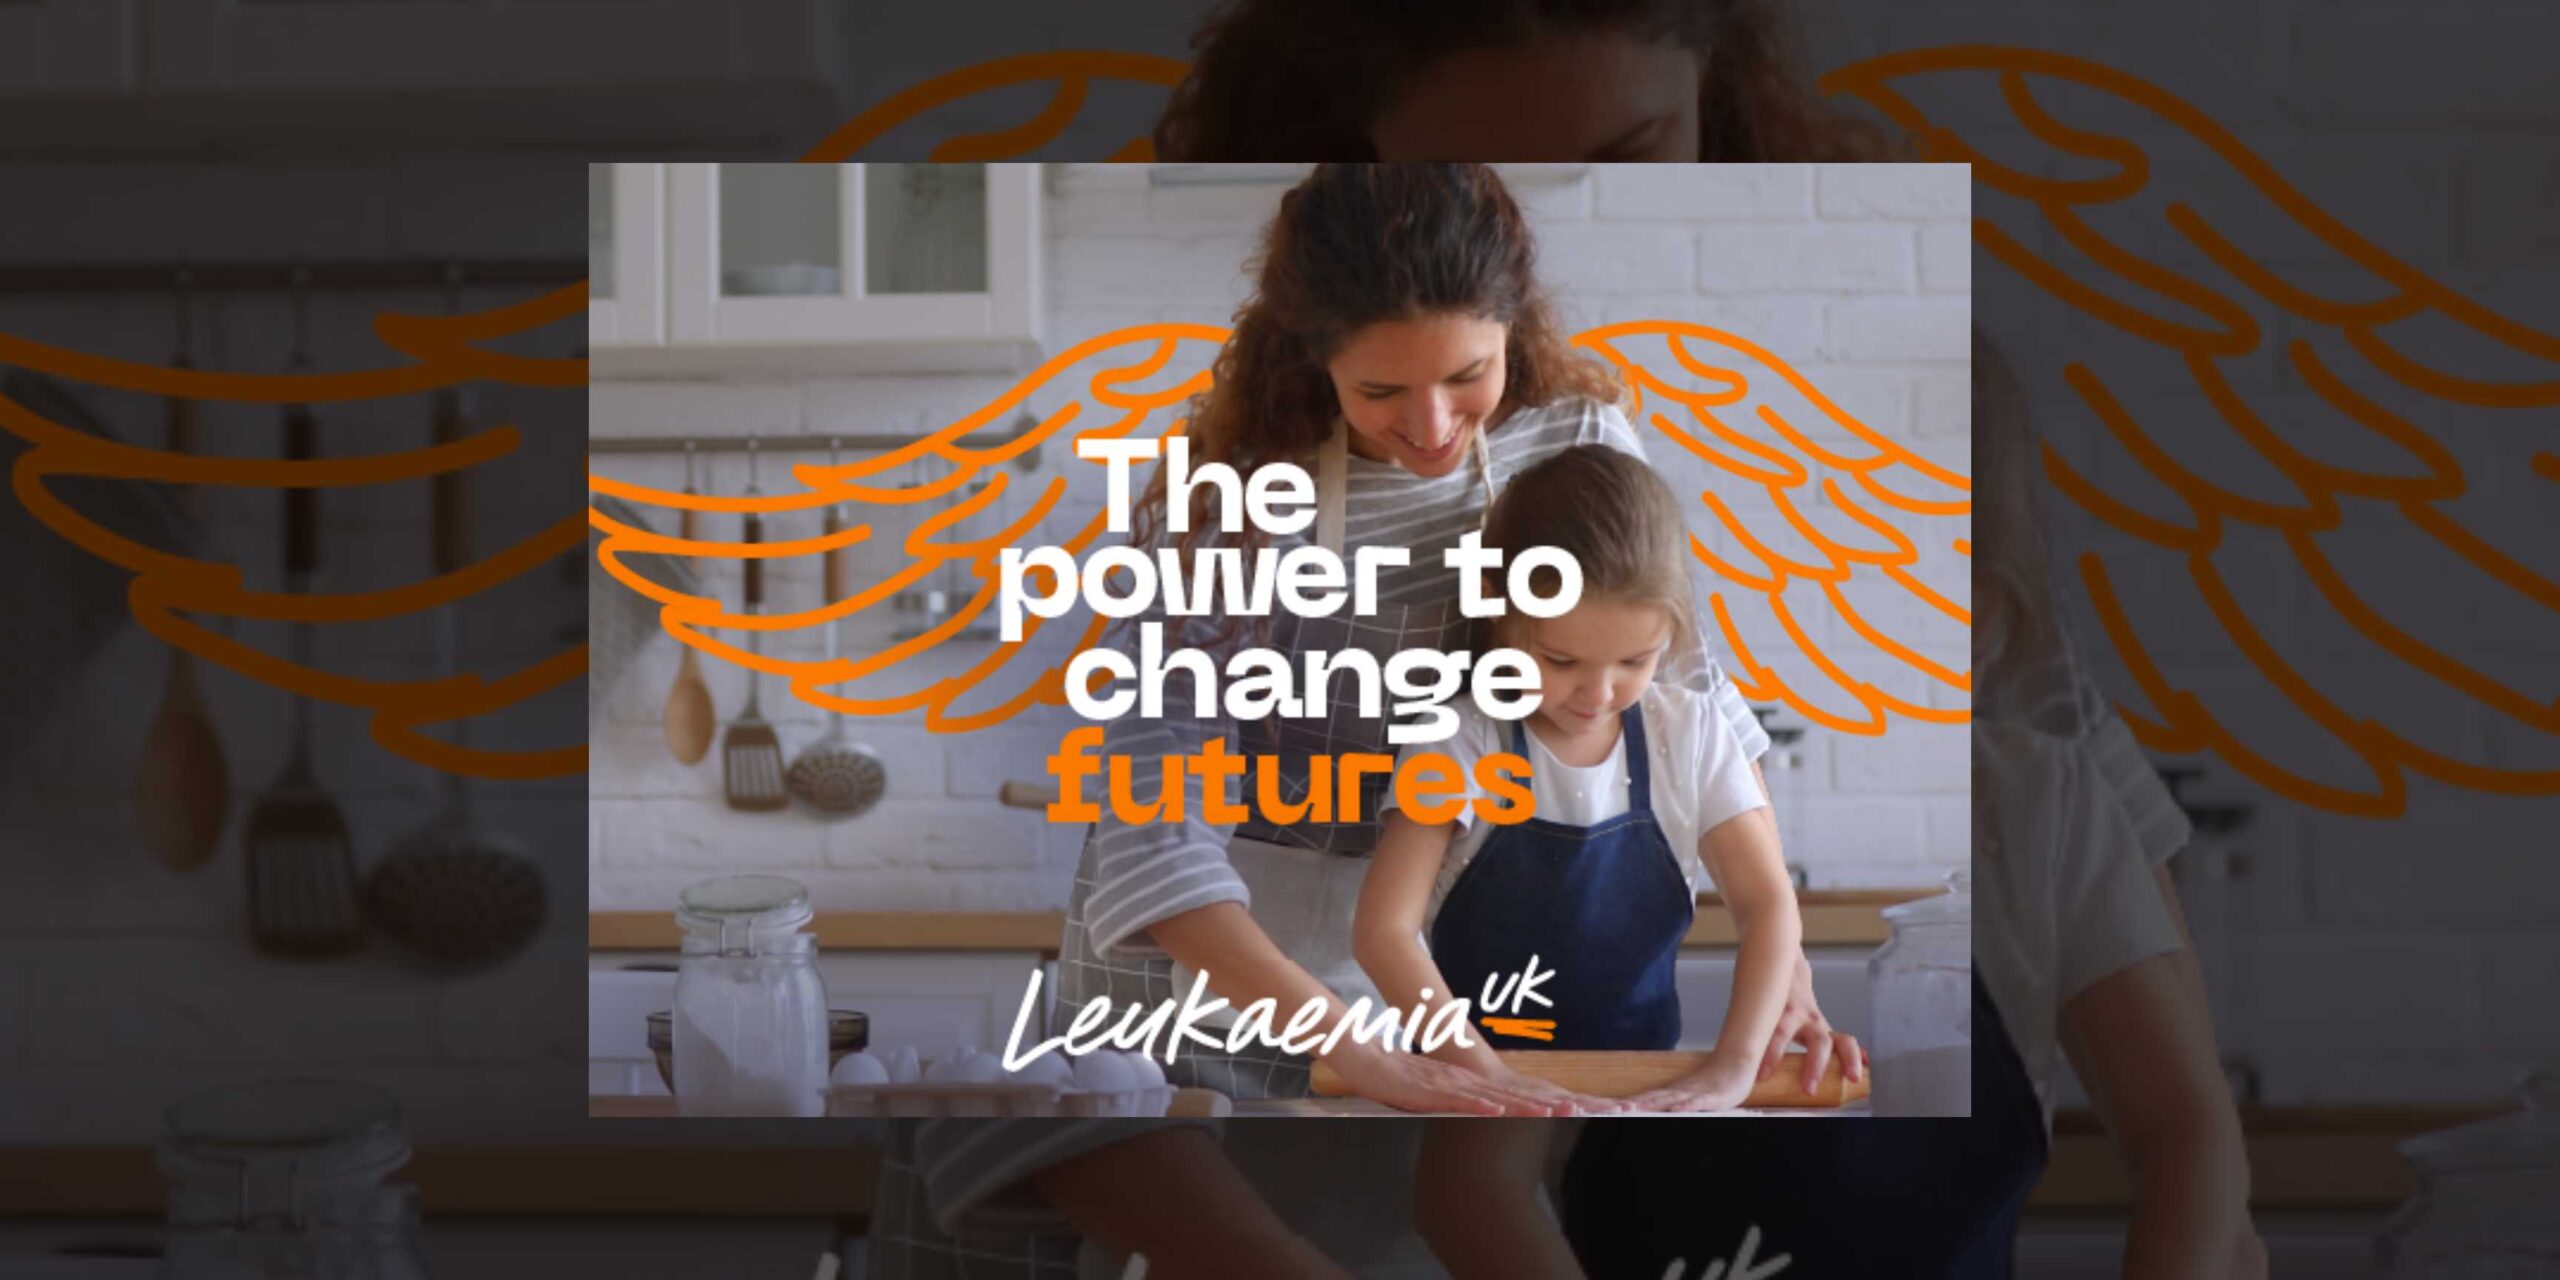 A Leukaemia branded graphic showing a woman and young girl making pastry. The mother has angel wings and the graphic includes the text 